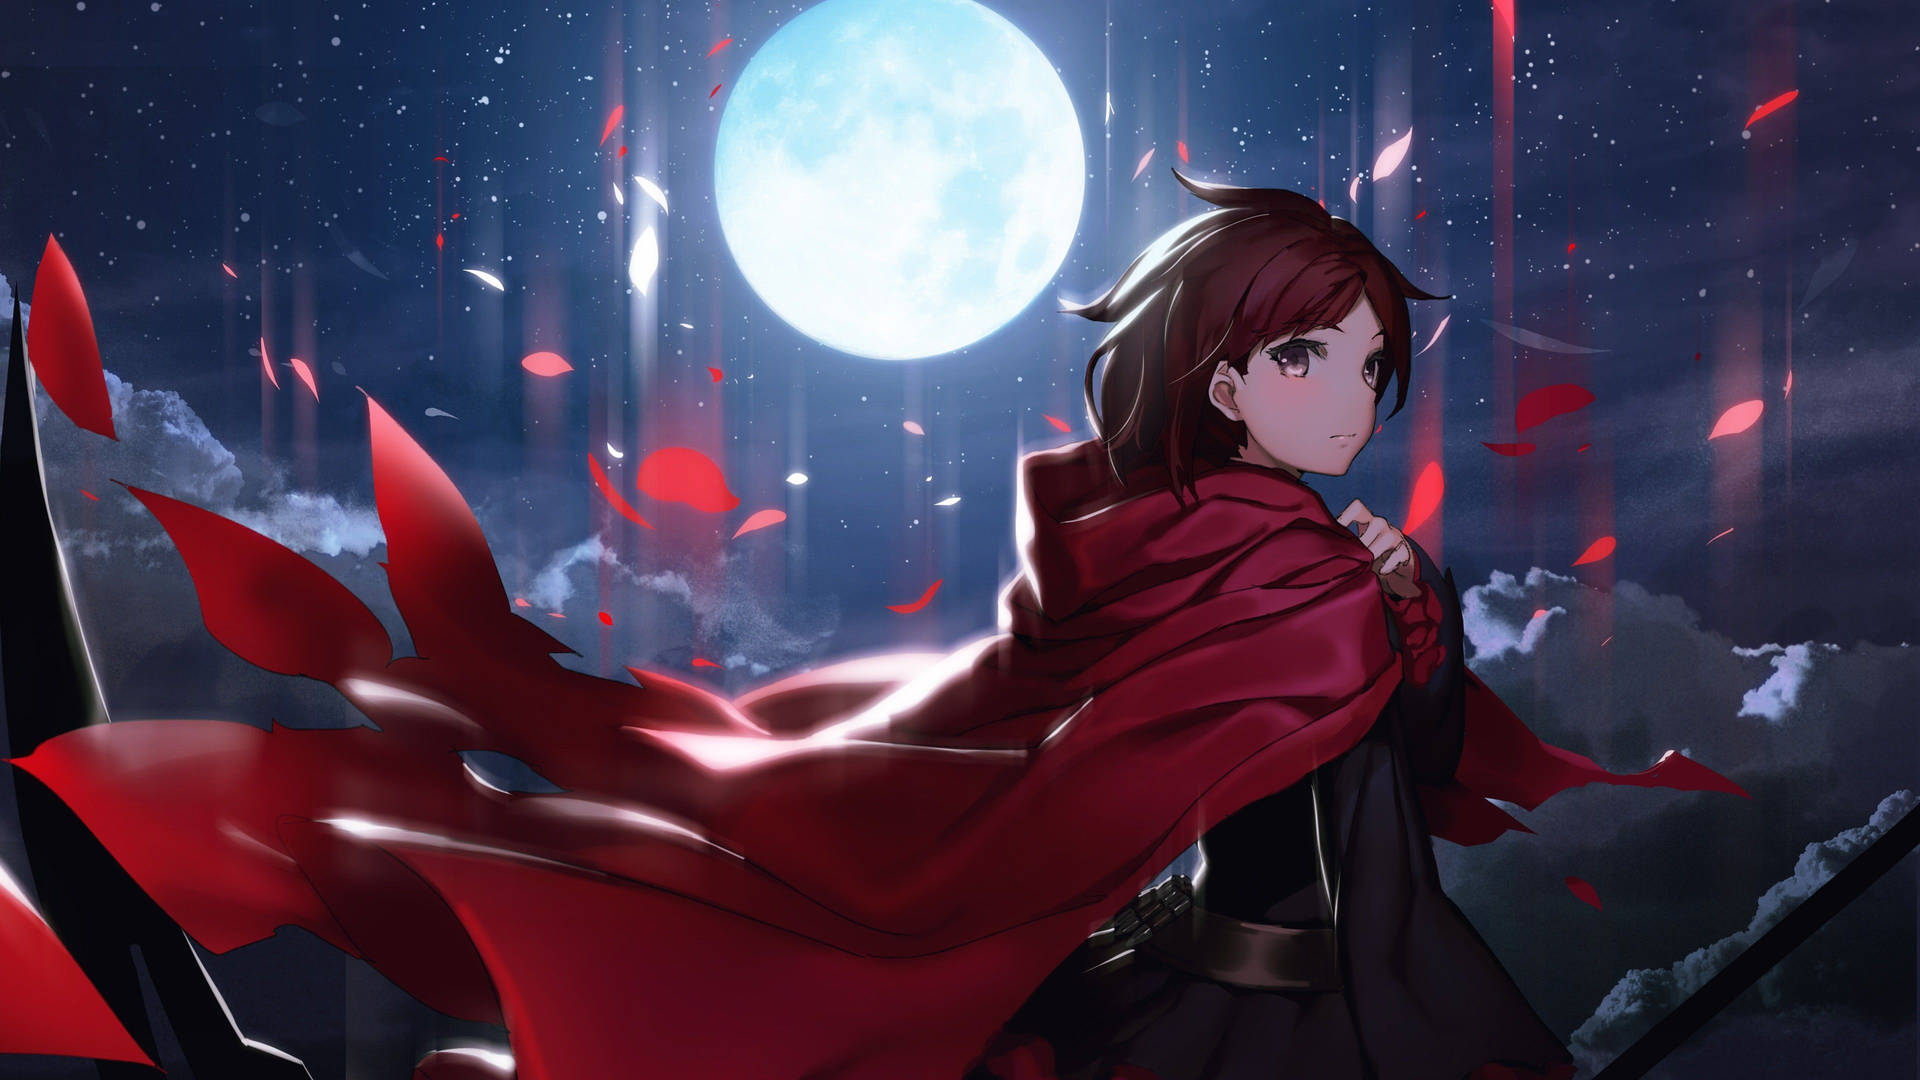 Moon 4k Anime Girl In Red Aesthetic Cape Background